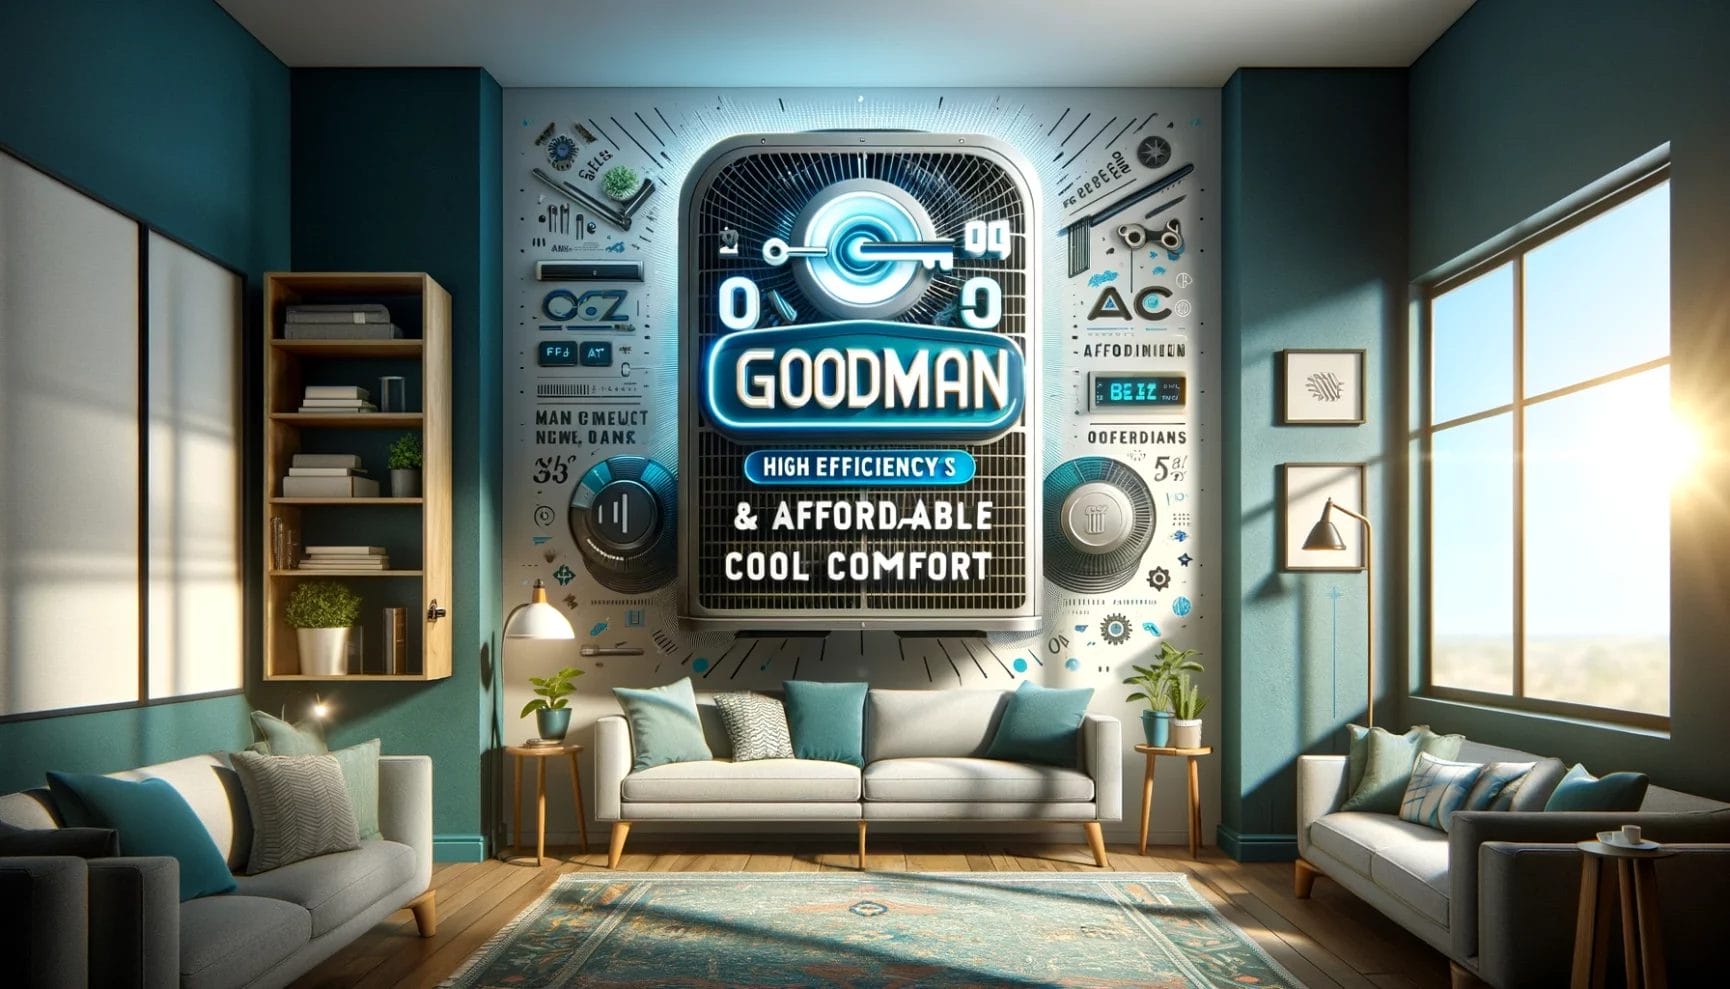 A stylized advertisement for goodman air conditioning floats in a cozy, sunlit living room with modern decor.